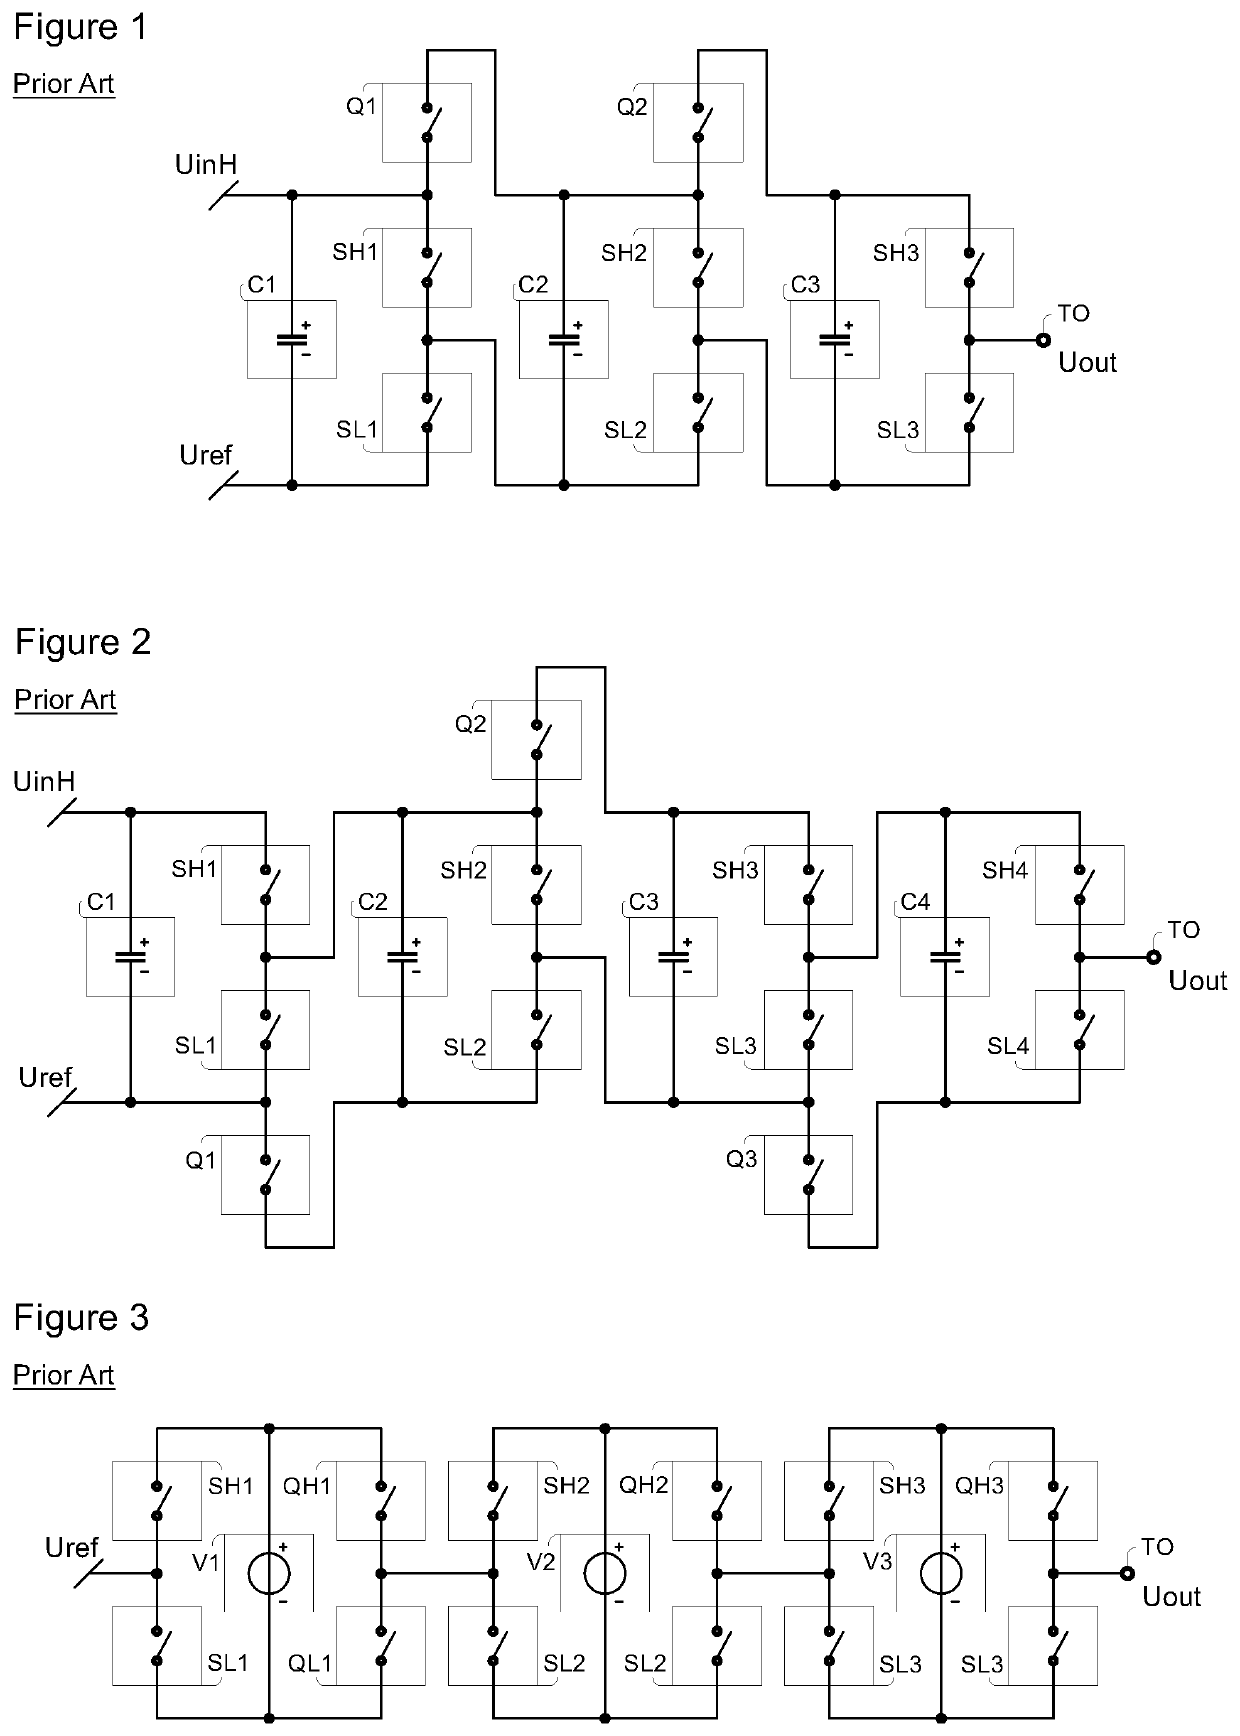 Switching power converter system